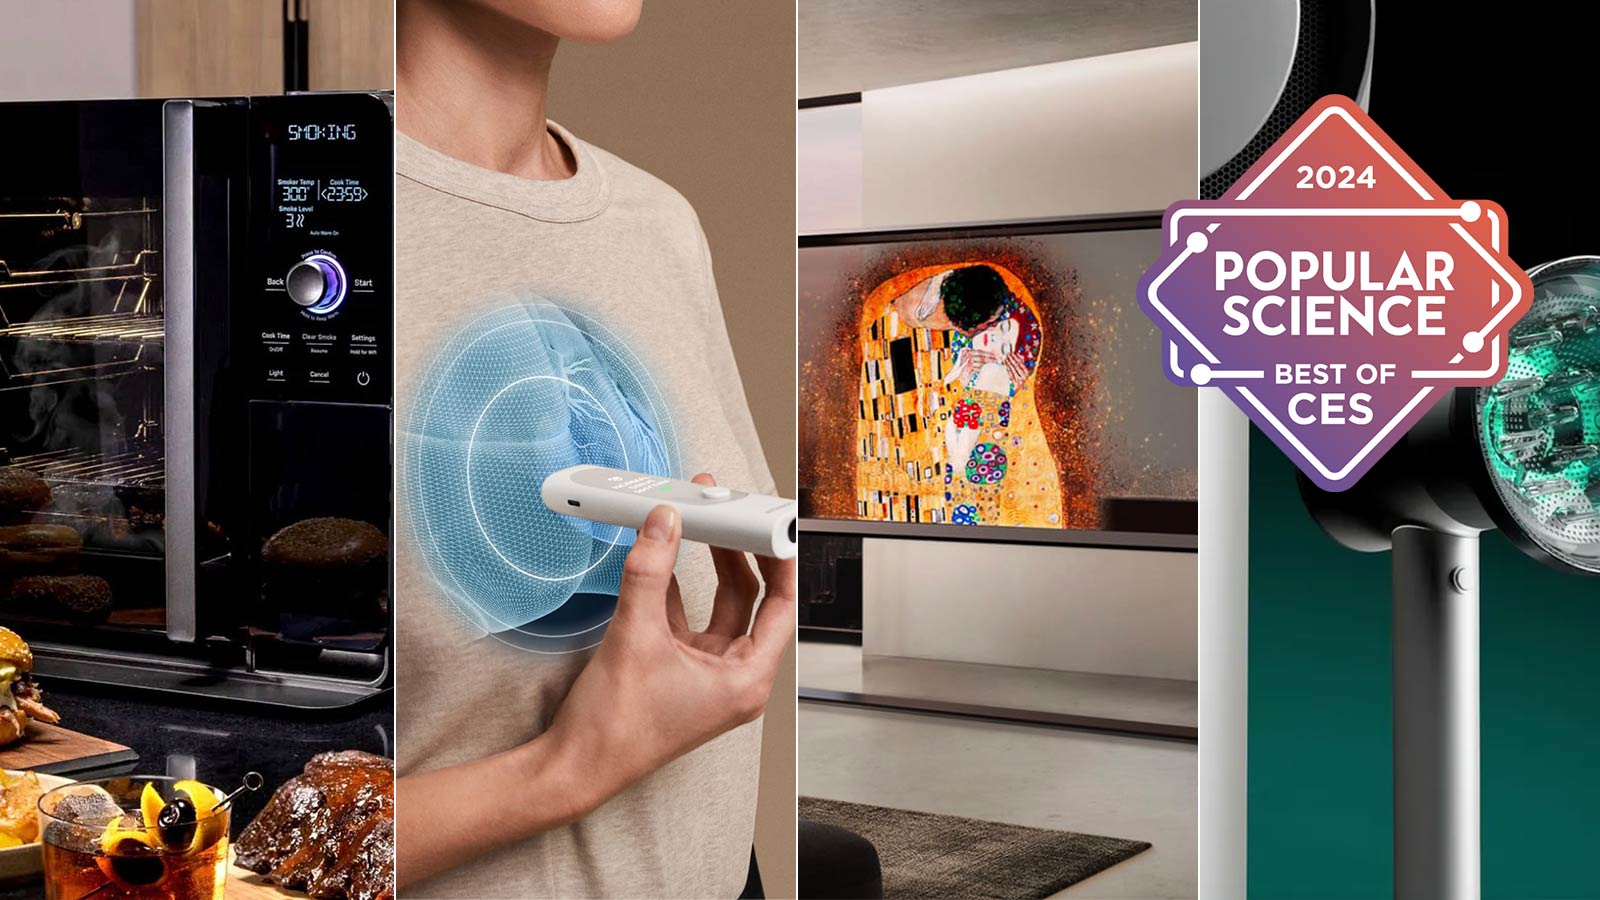 5 Tech Gadgets That Will Change Your Life in 2024